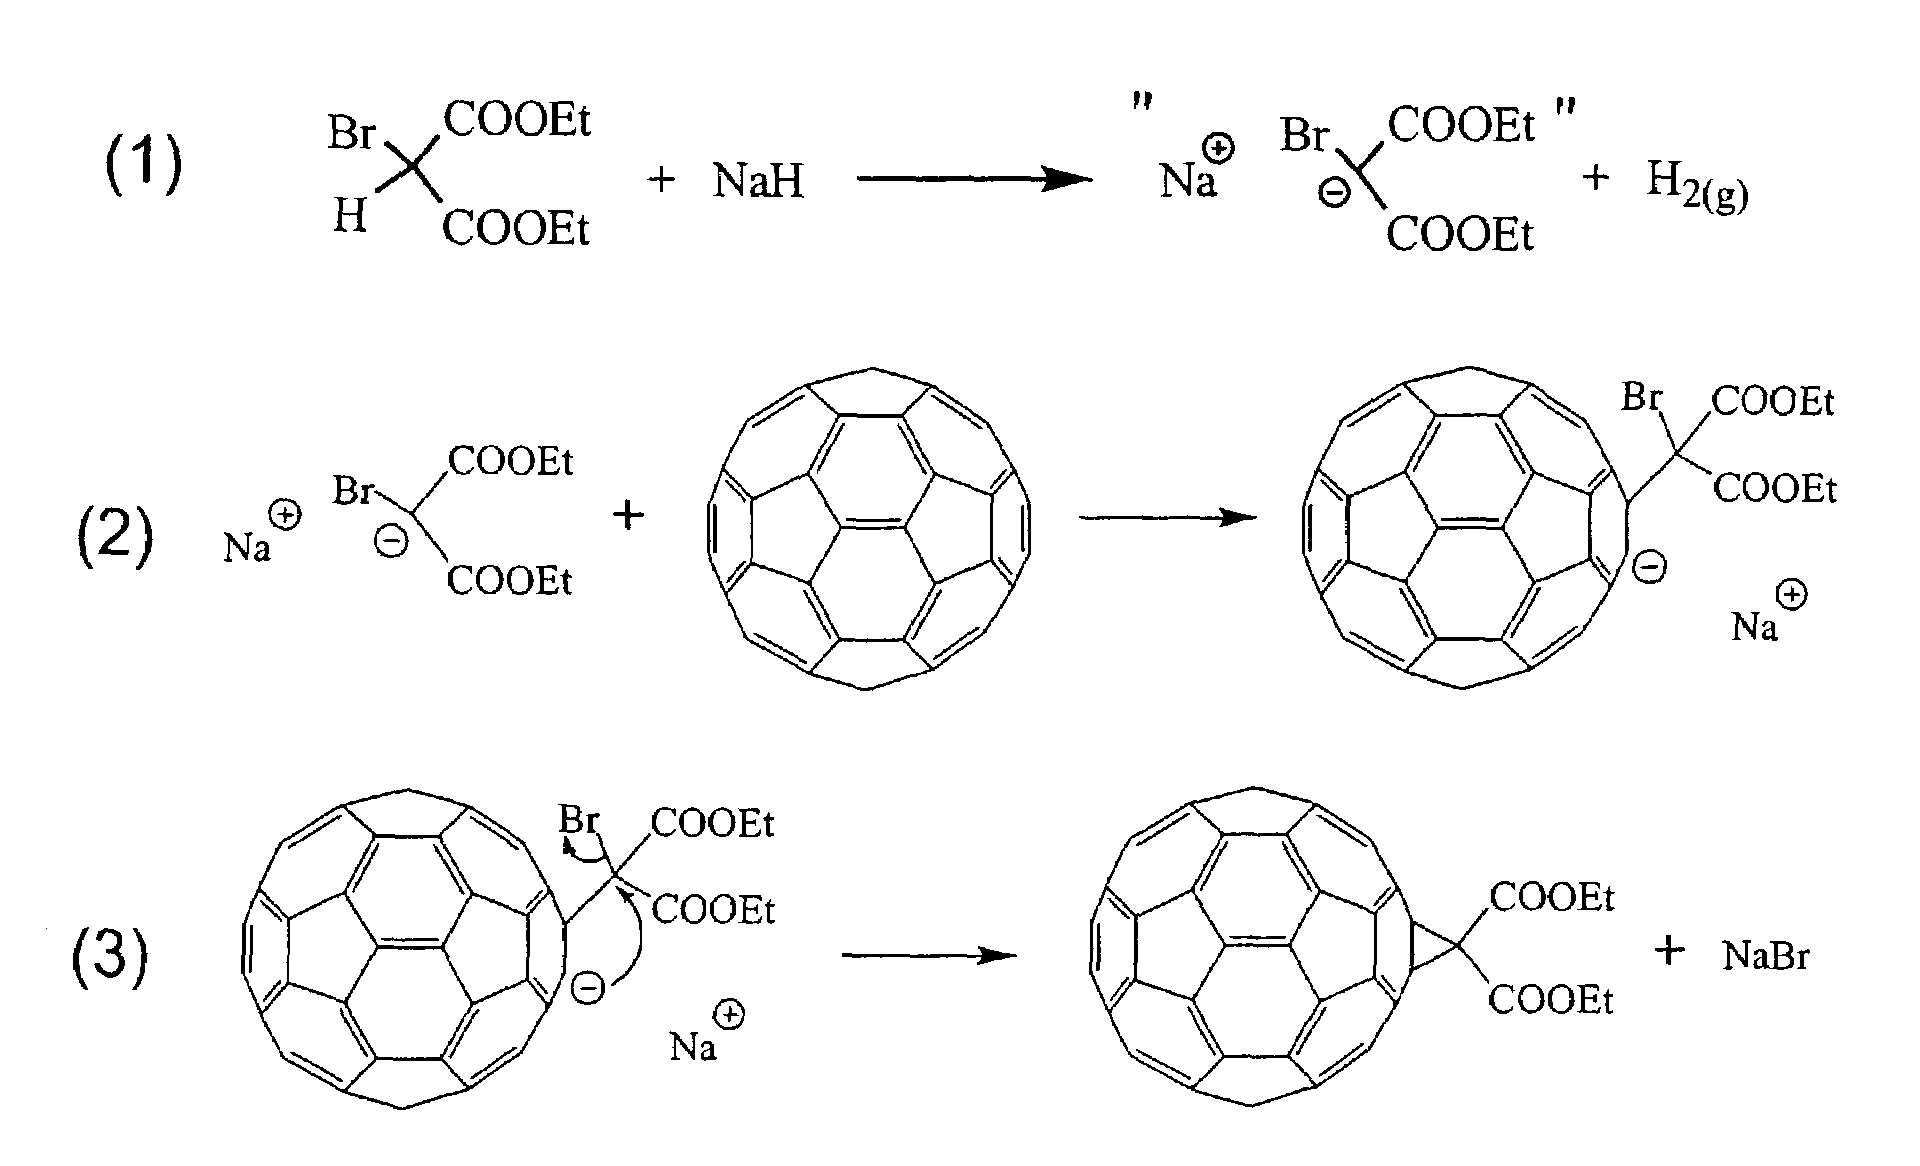 Derivatization and solubilization of insoluble classes of fullerenes